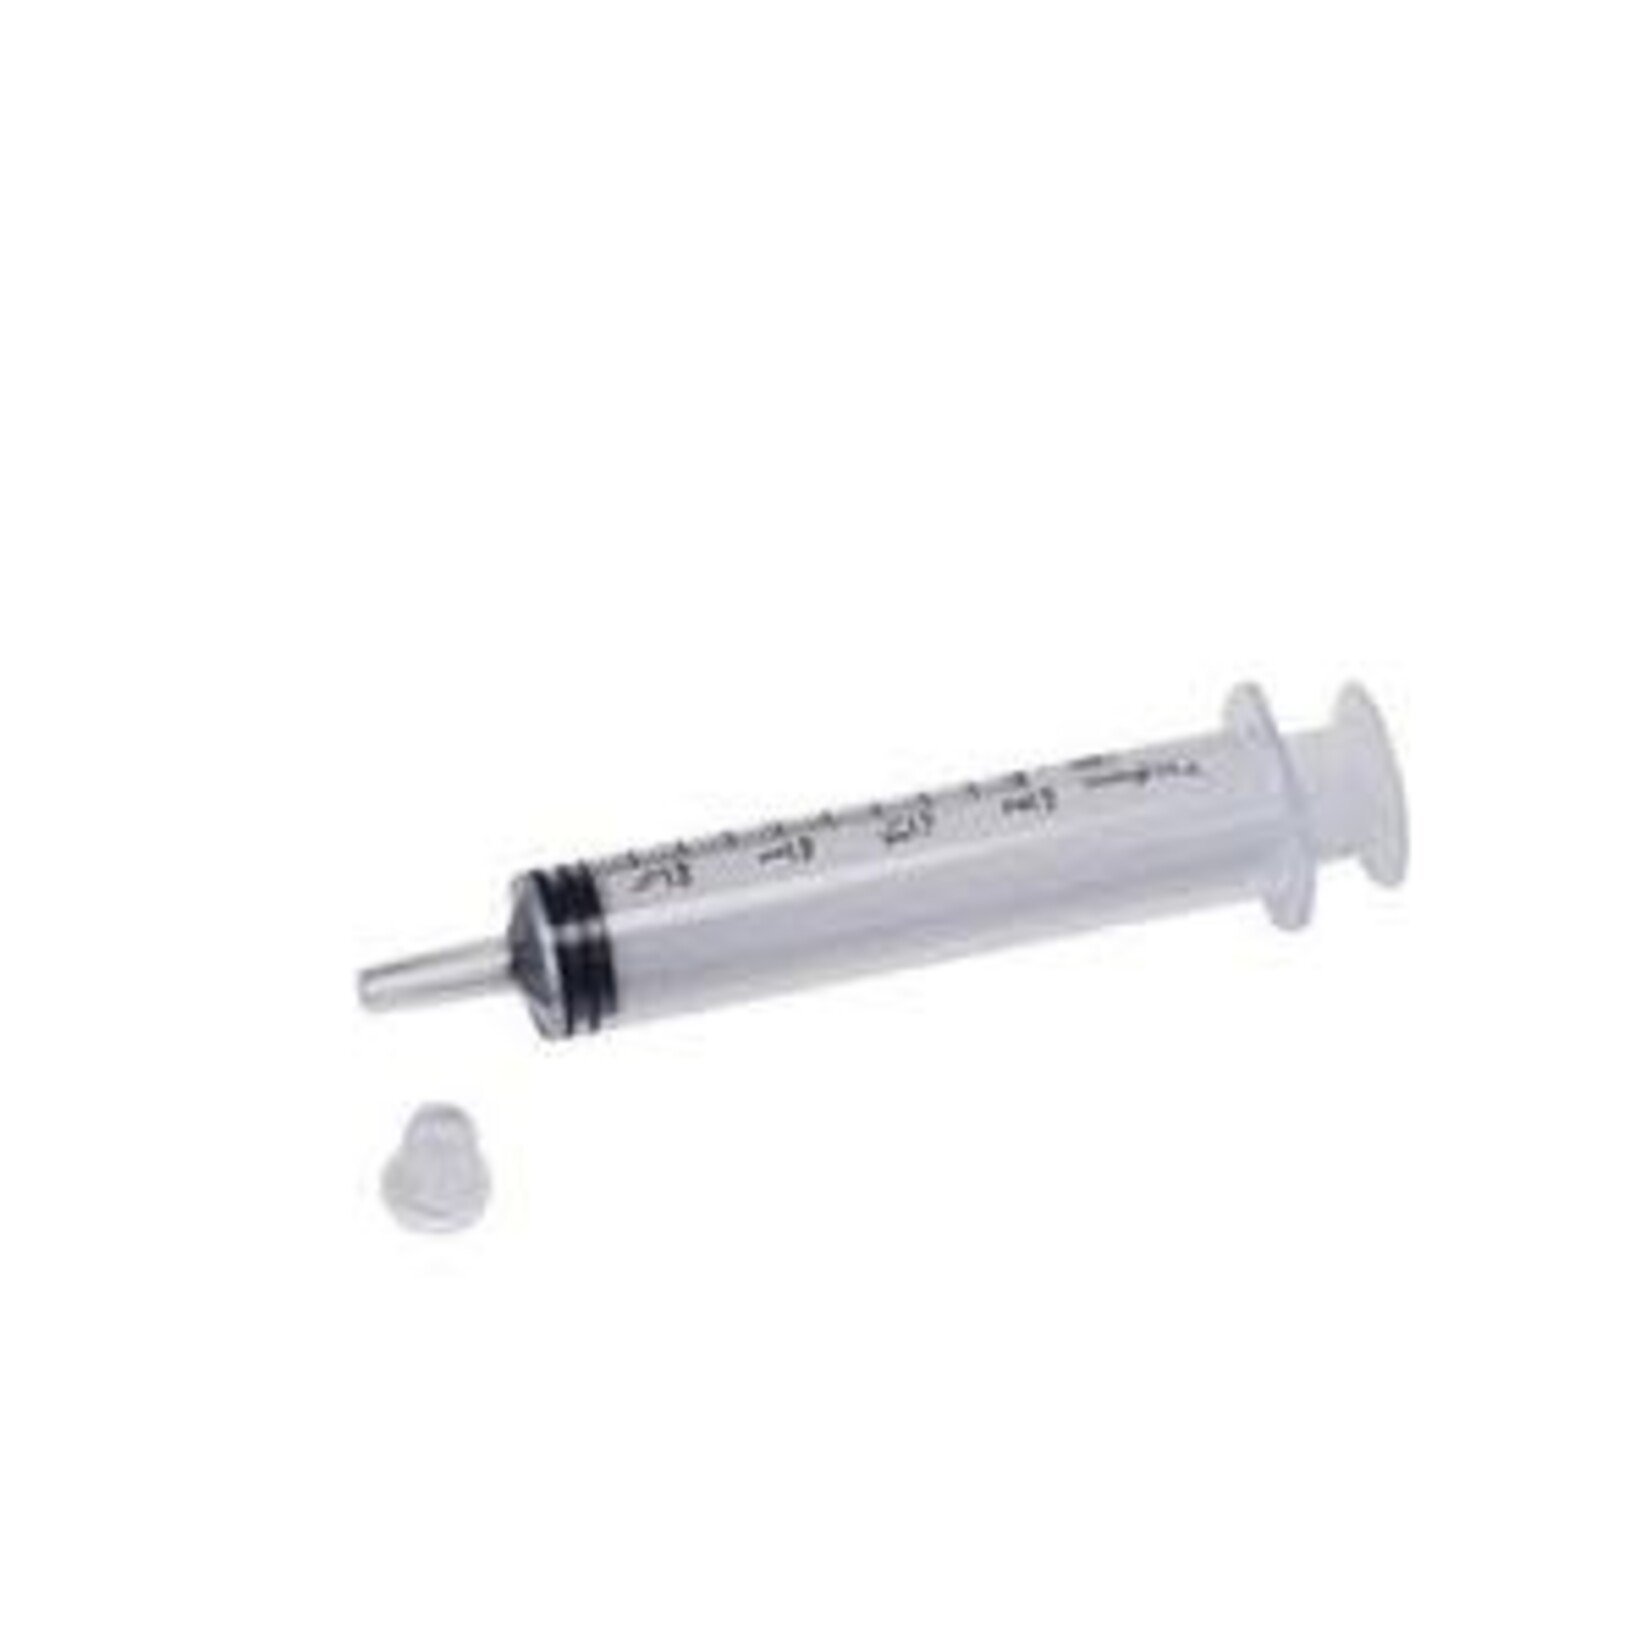 Monoject™ Clear Oral Medication Syringe 10mL with Separate Ribbed Tip Caps, Polypropylene Barrel and Plunger Rod